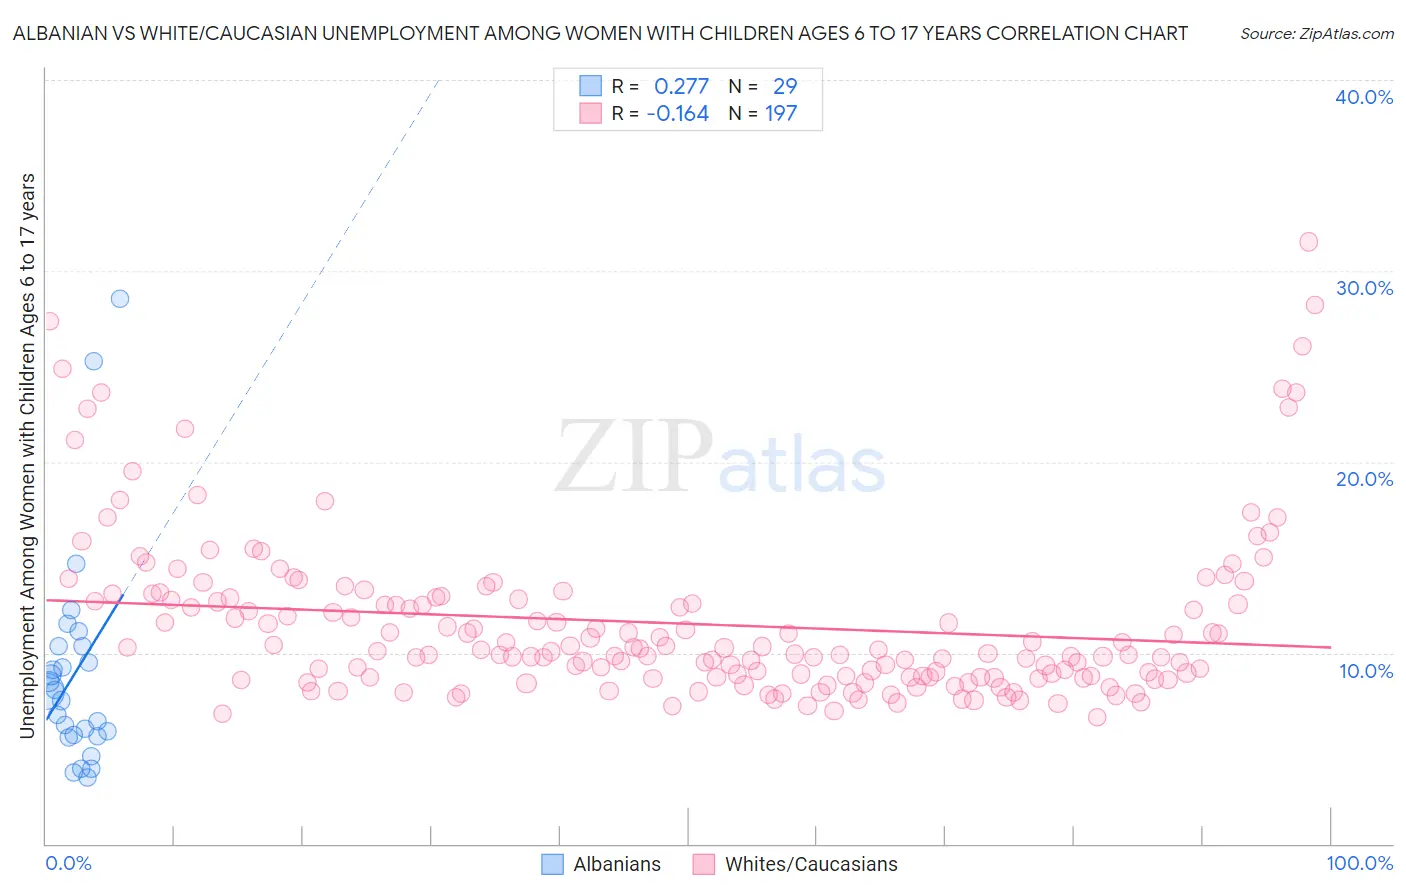 Albanian vs White/Caucasian Unemployment Among Women with Children Ages 6 to 17 years